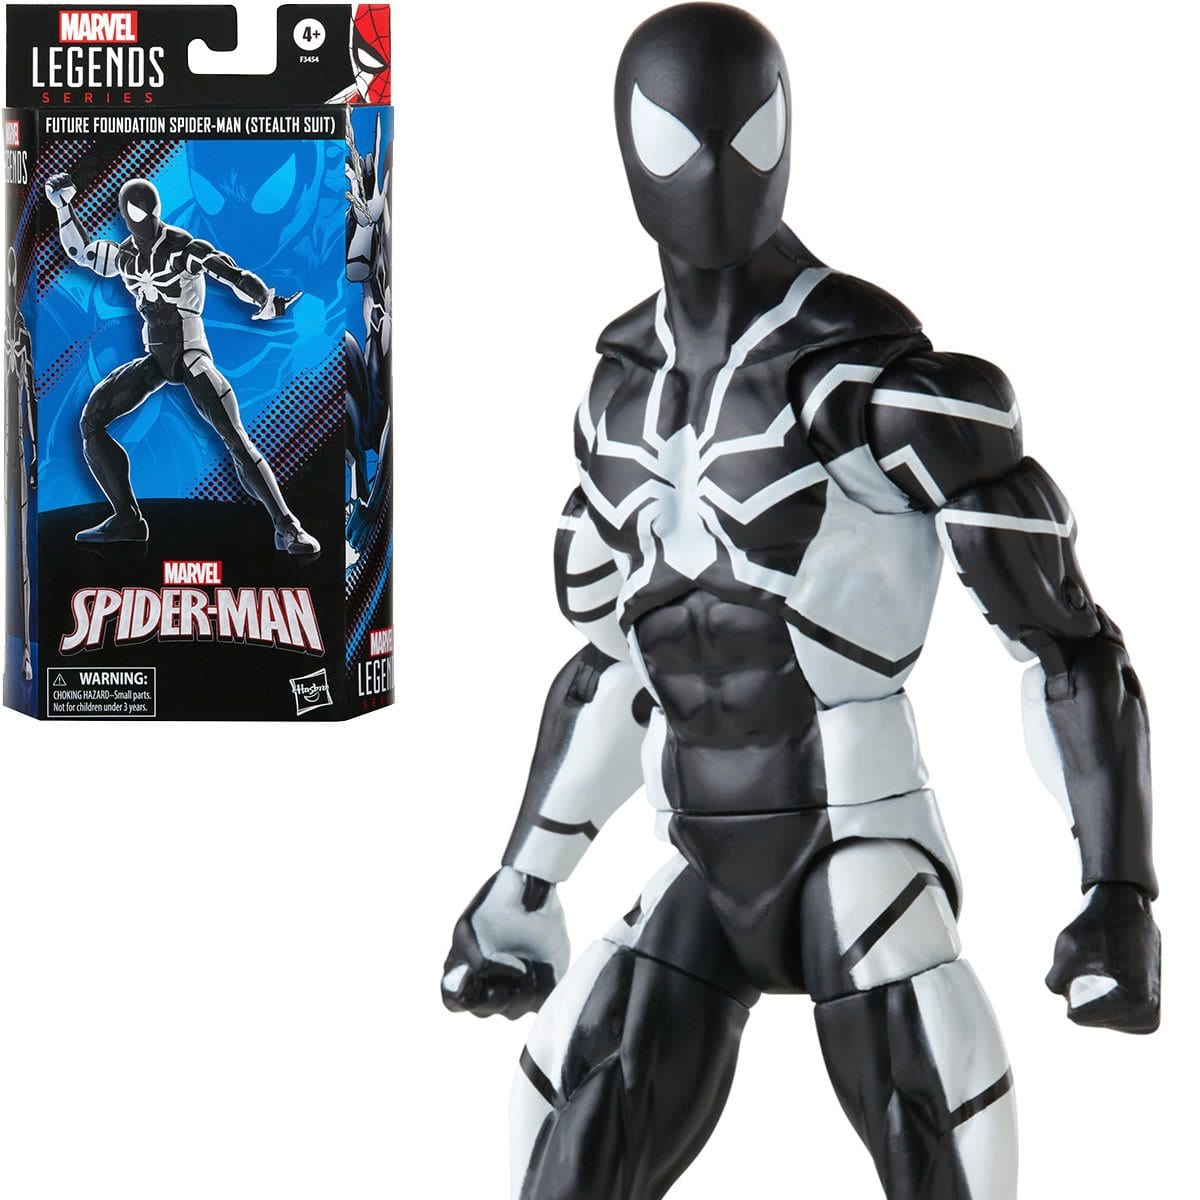 Future Foundation Spider-Man Stealth Suit Hasbro Marvel Legends Series Action Figure and box